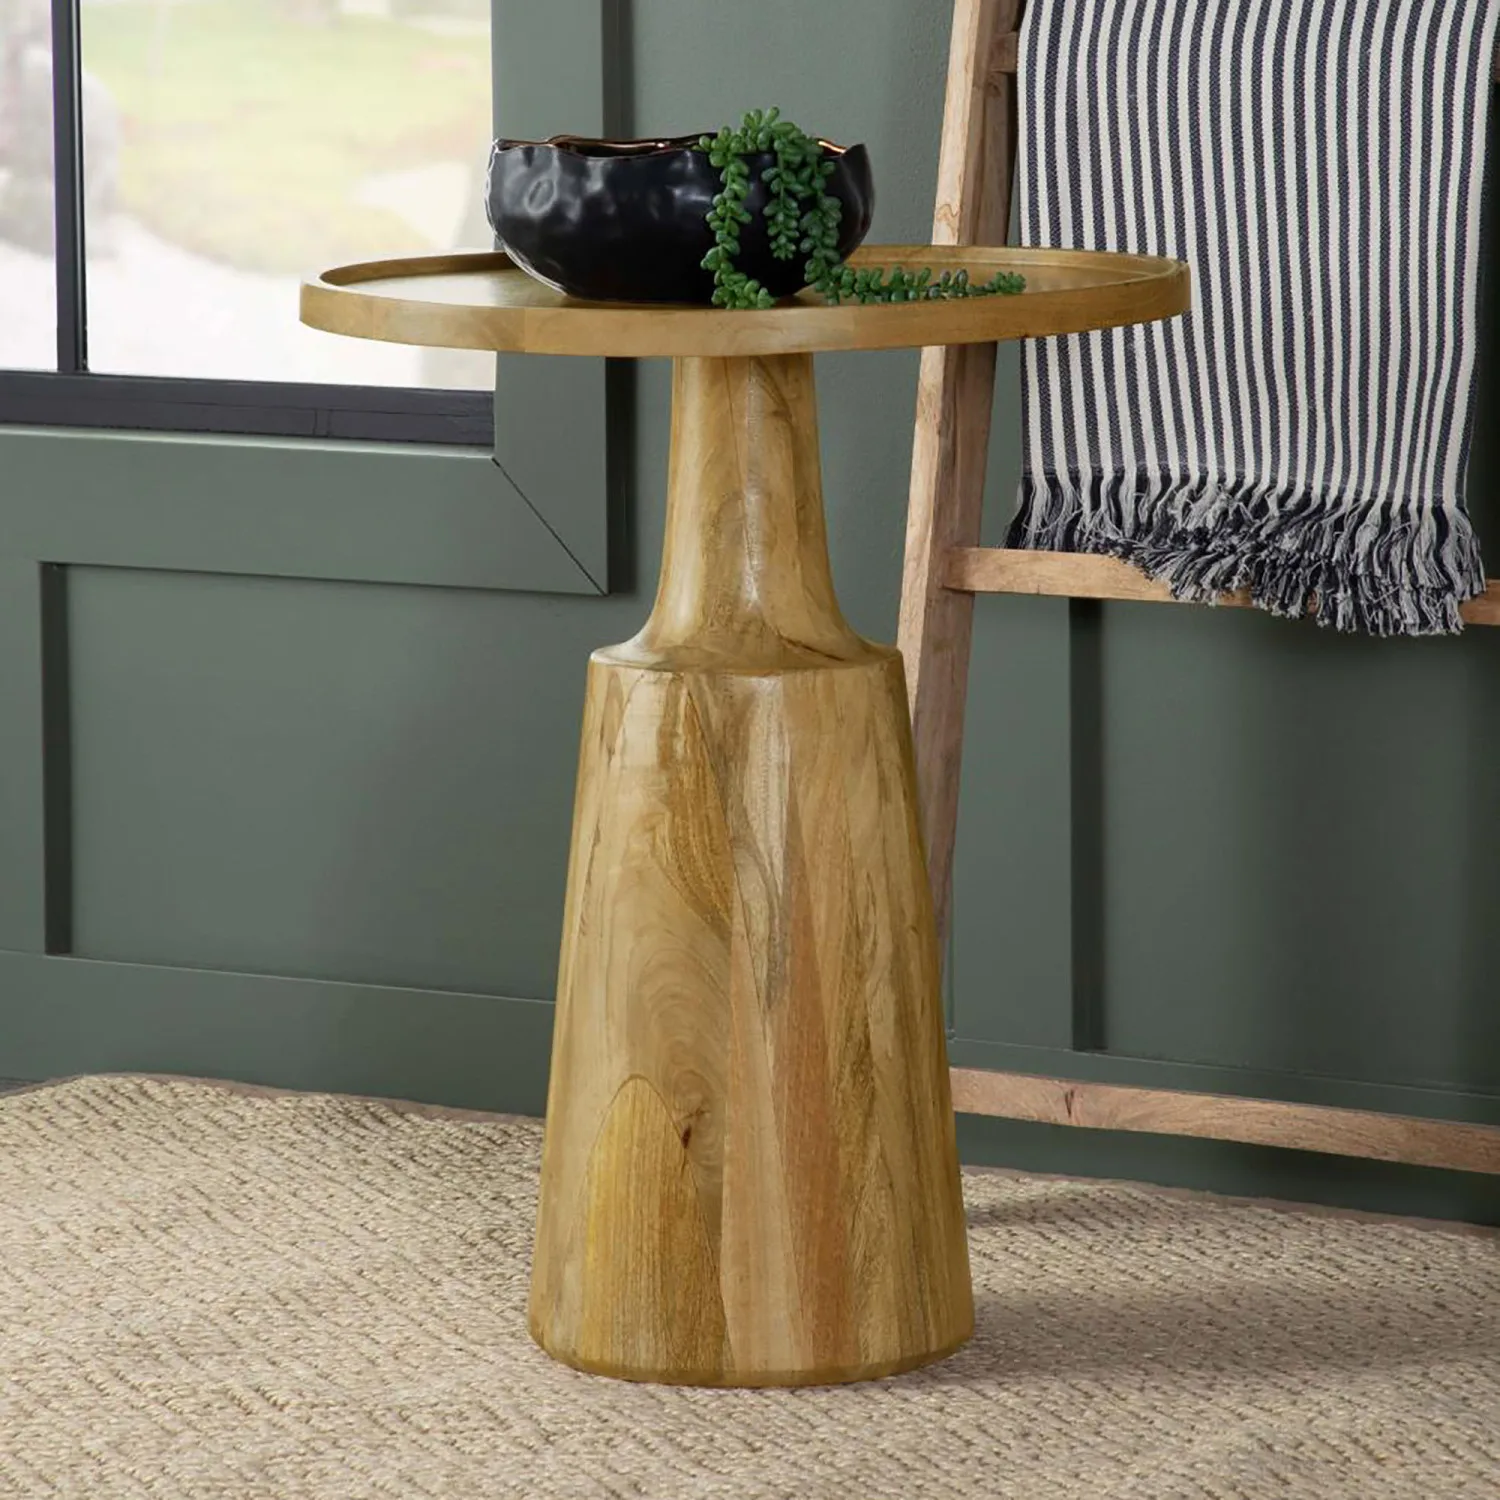 

Elegant Natural Wood Pedestal Accent Table with Rustic Charm and Distinctive Details for Living Room or Entryway Décor makeup